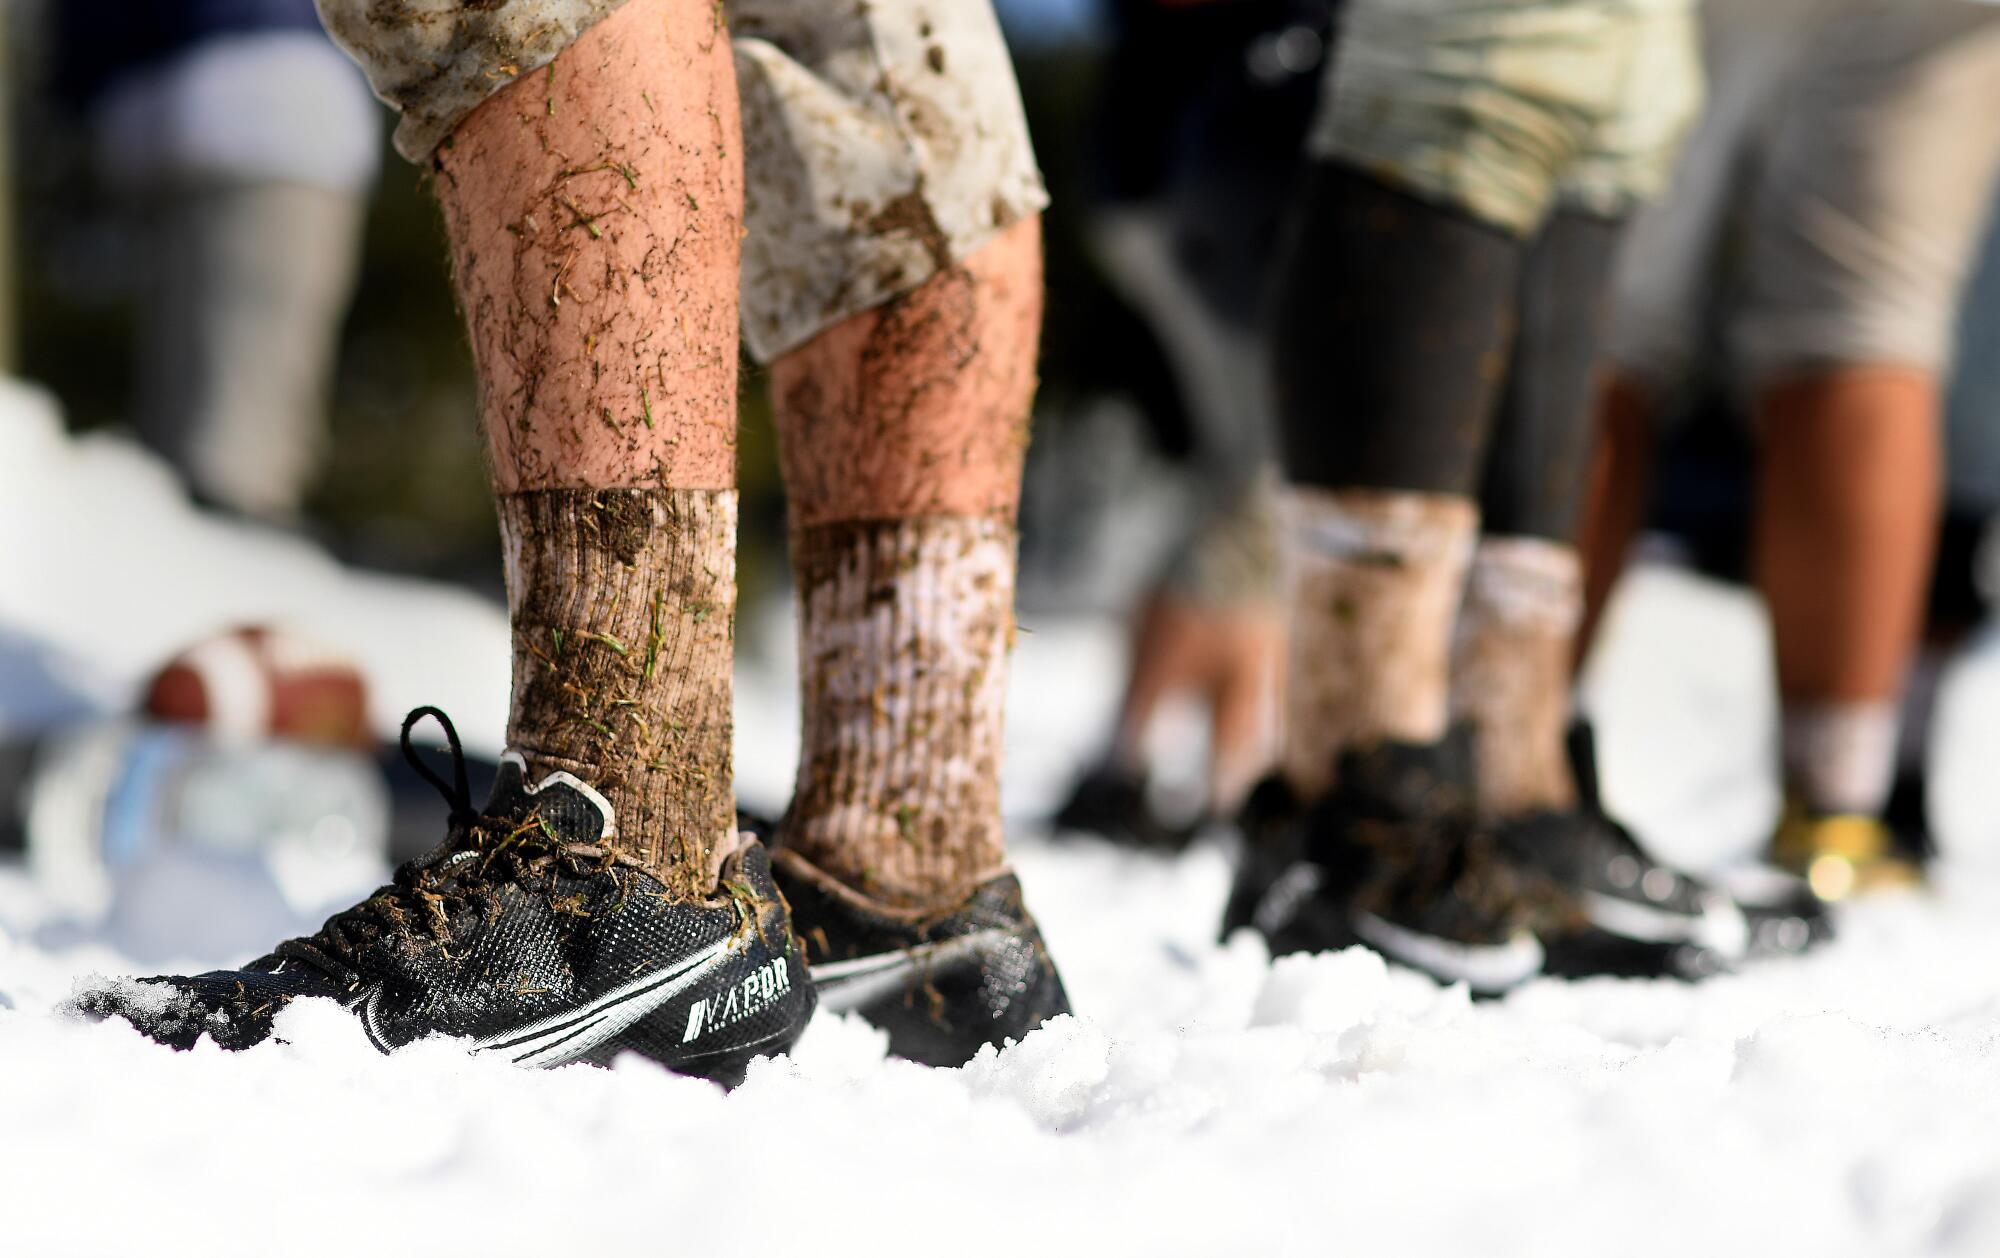 Rim of the World High School football players practice on a muddy field from melting snow in Rimforest on Tuesday.